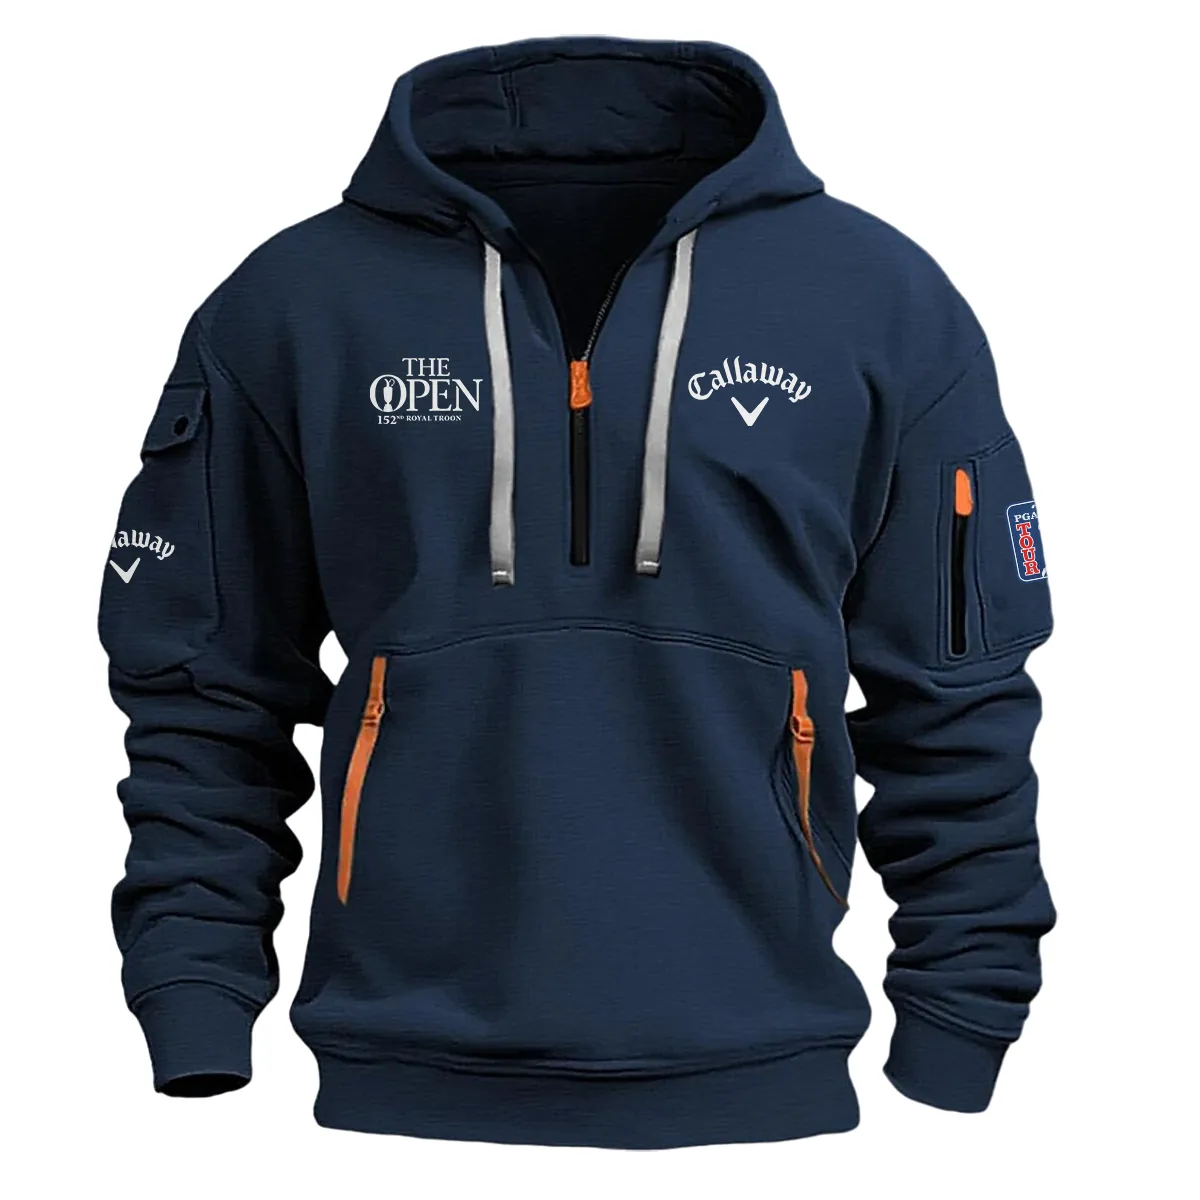 Navy Color Callaway Fashion Hoodie Half Zipper 152nd The Open Championship Gift For Fans